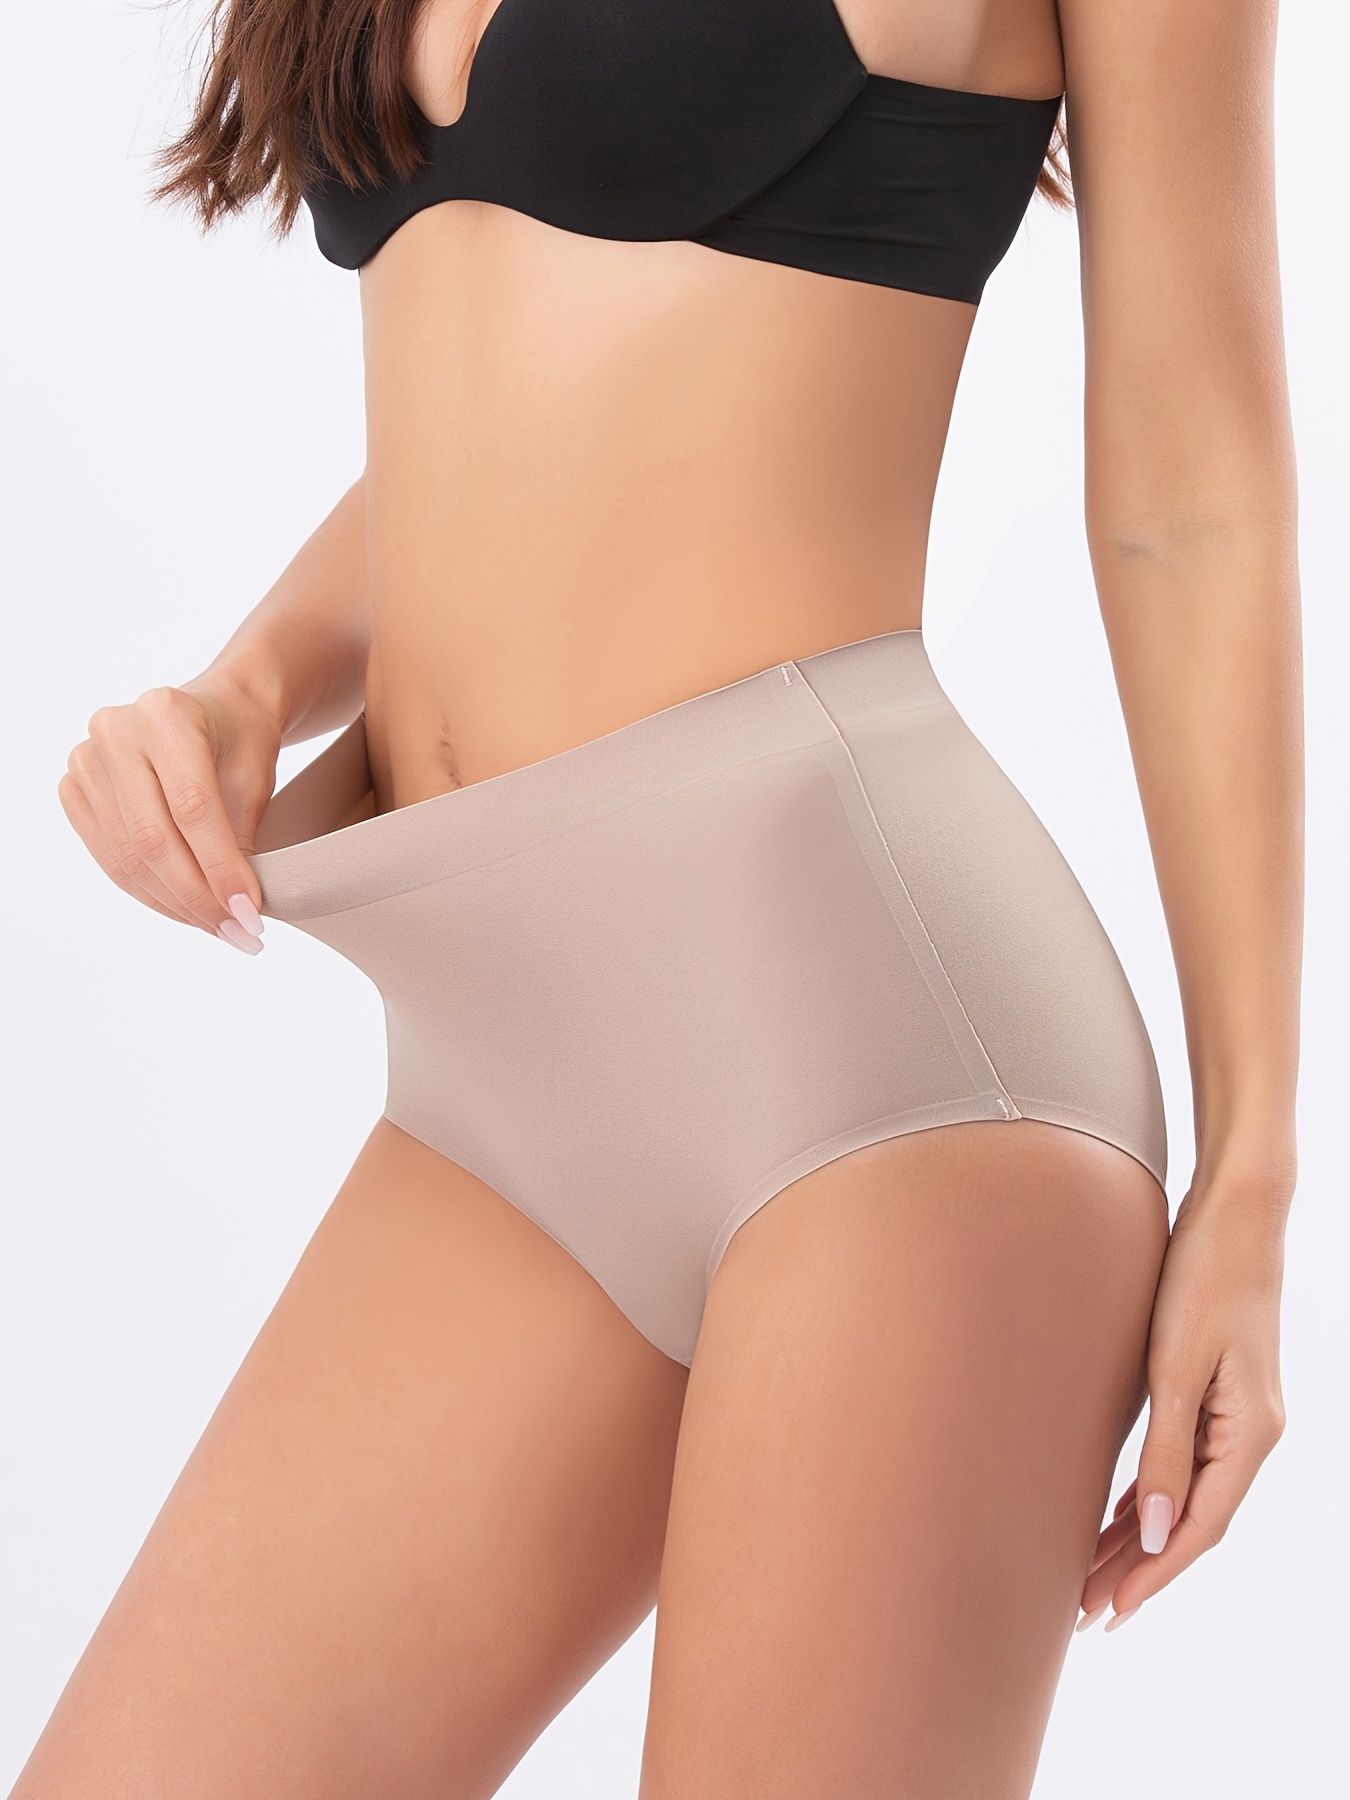  FINETOO Seamless Thongs for Women 6 Pack Sexy V-Wasit